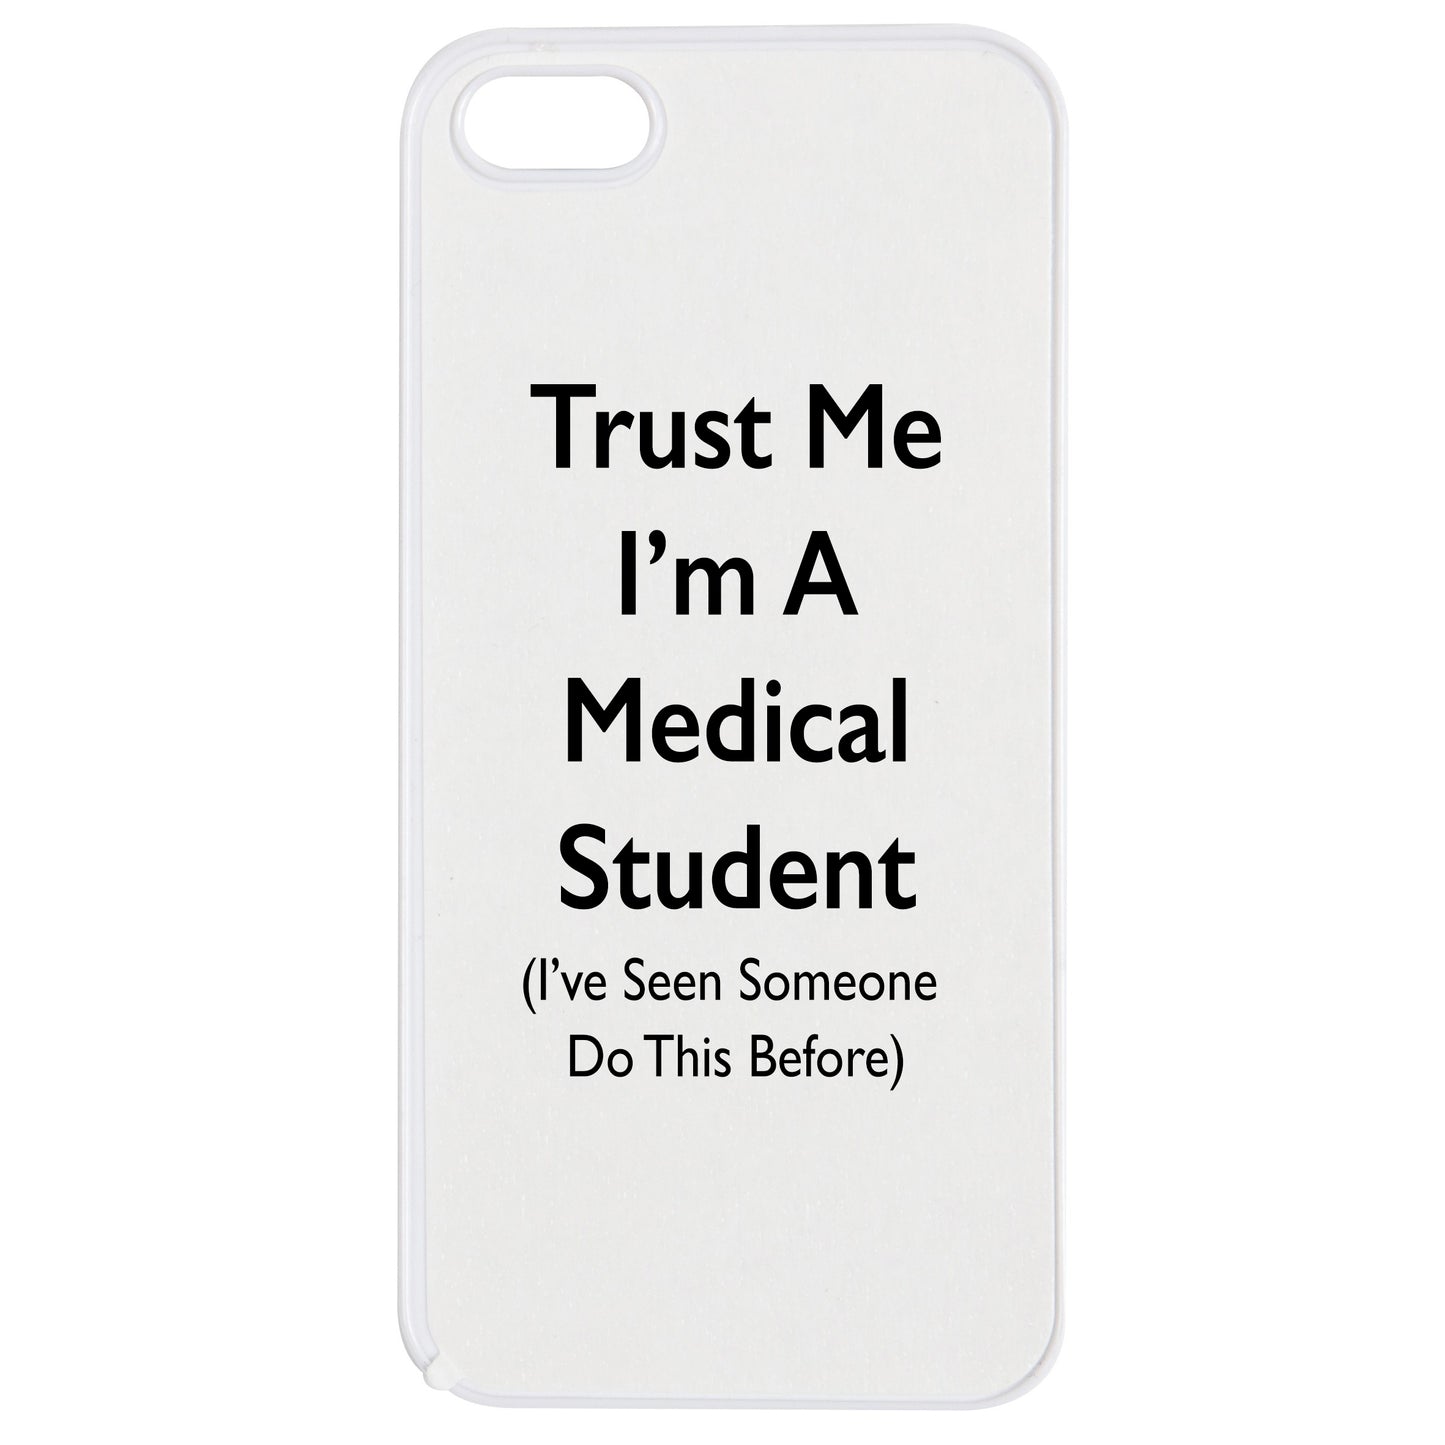 'Trust Me I'm a Medical Student' Phone Case - iPhone 5 & 5s